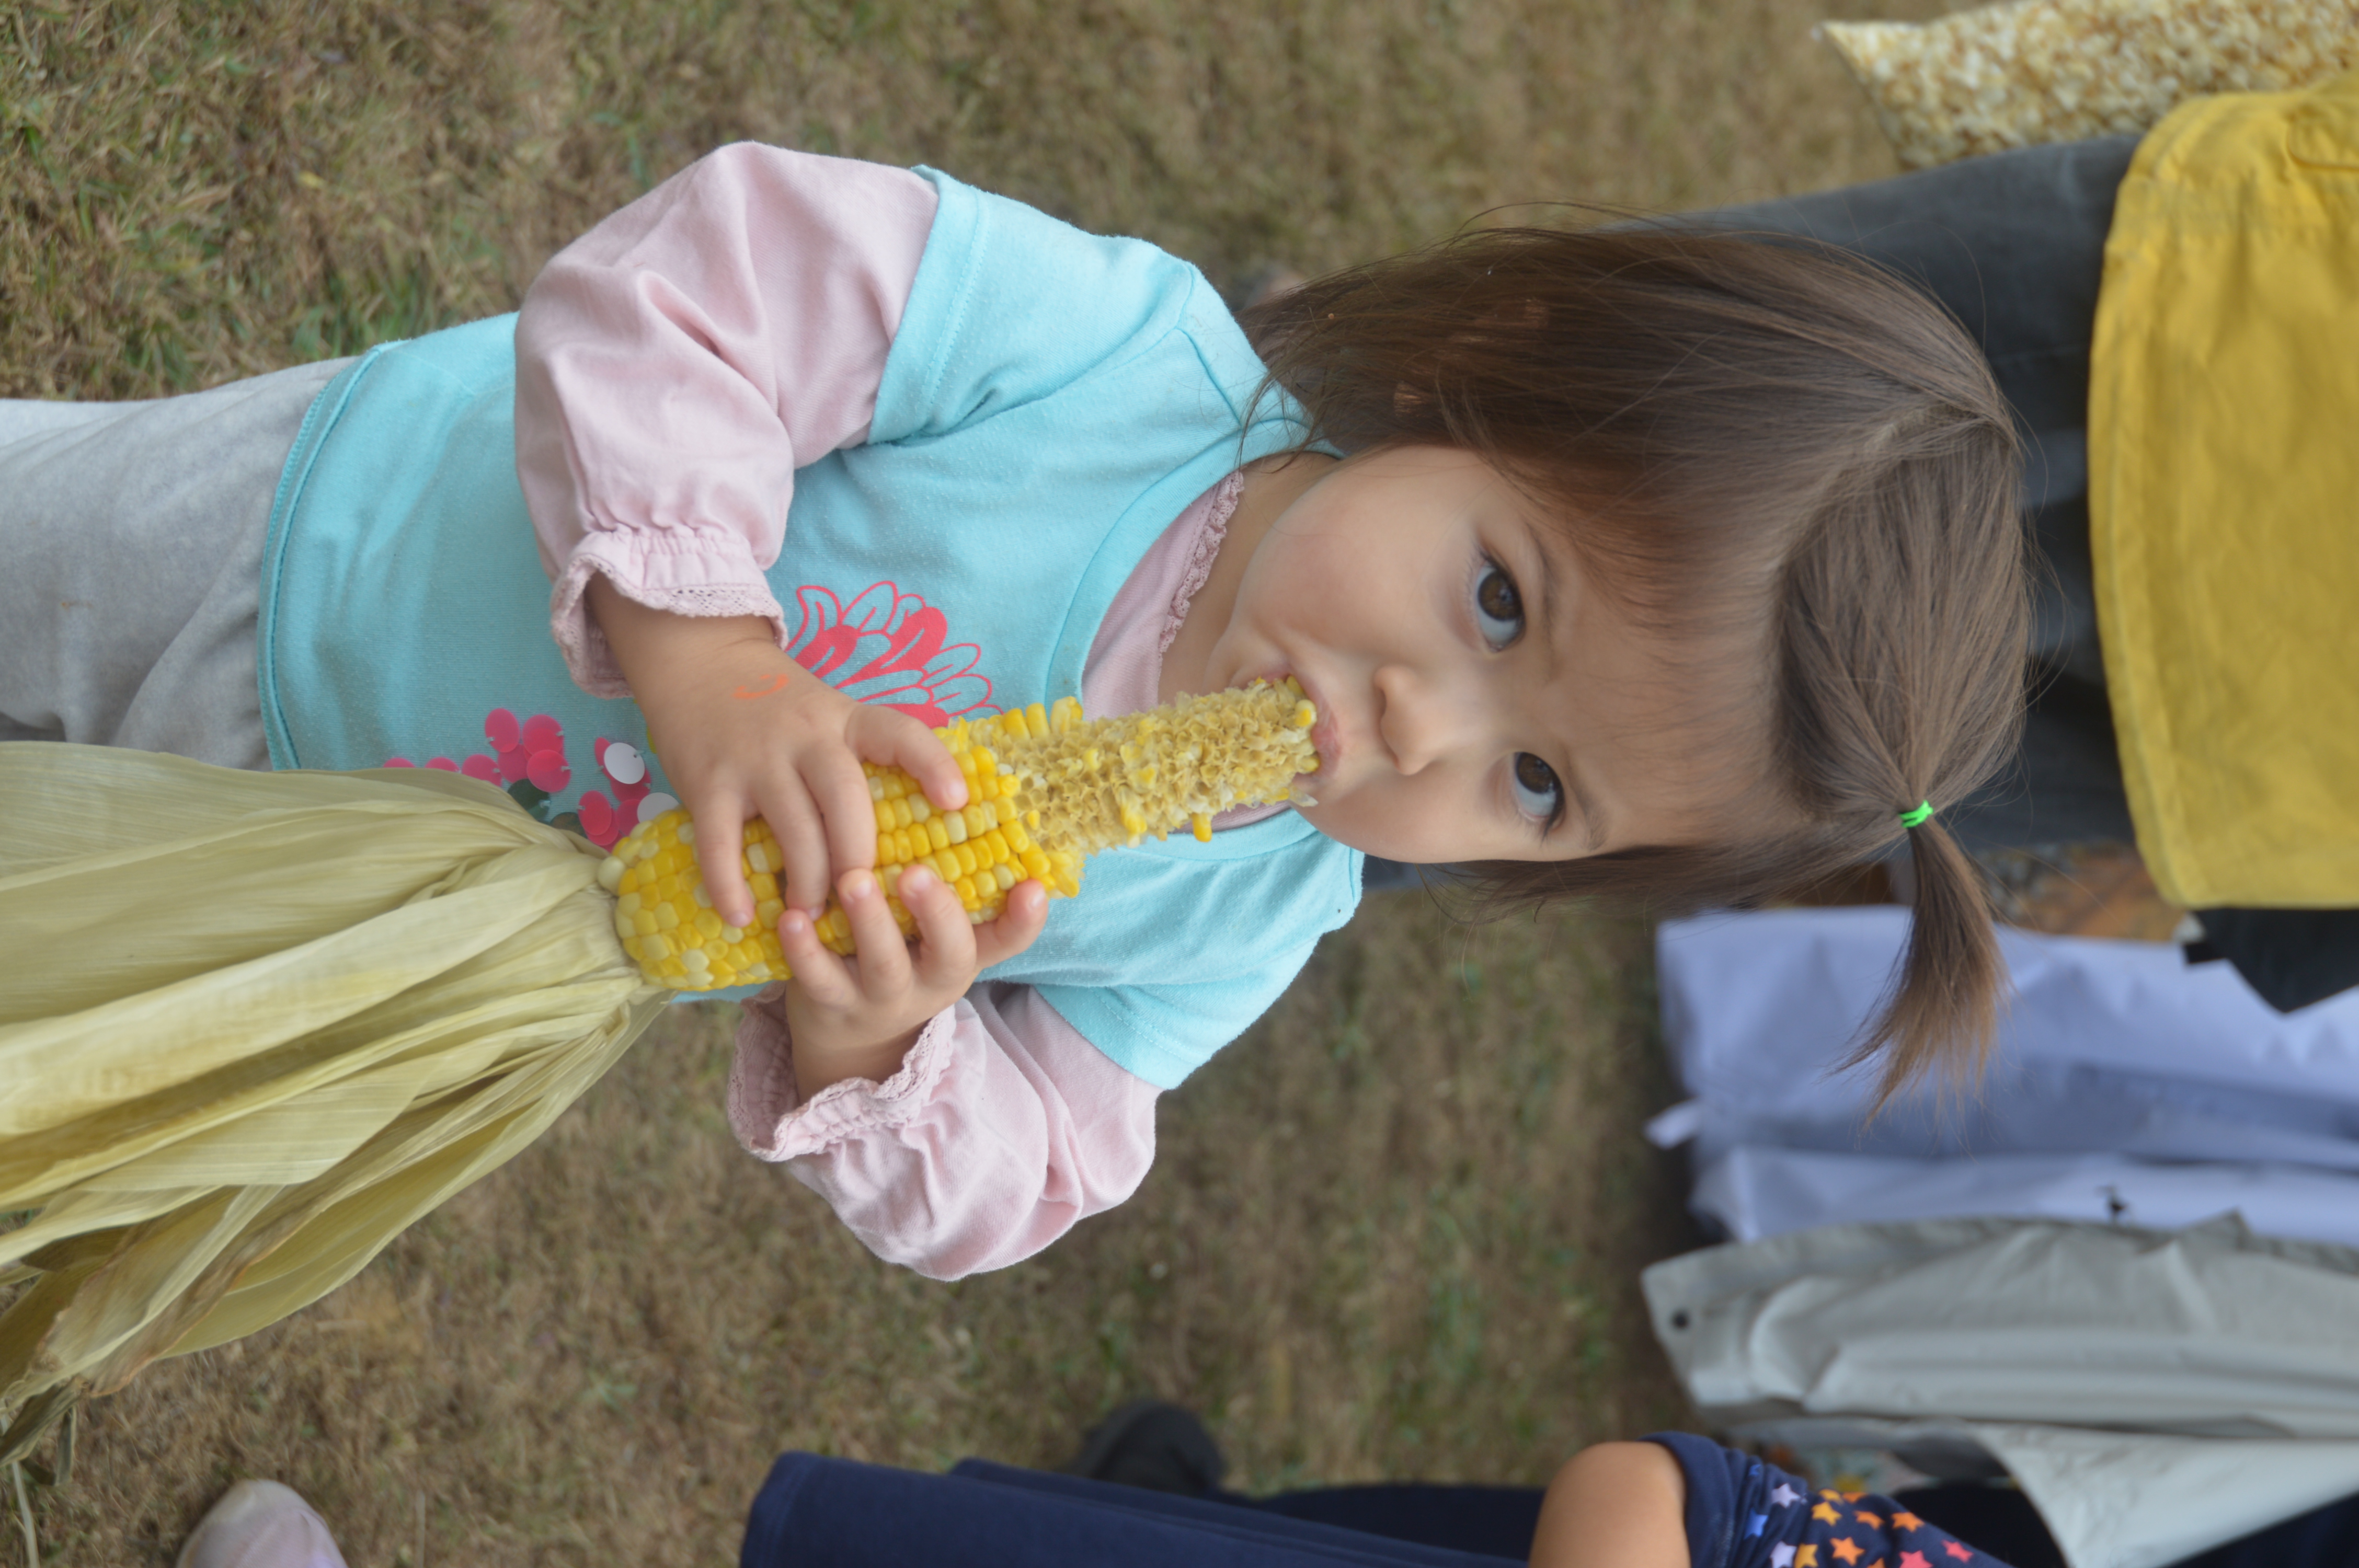 "Beanie" whose family came to the event from out of town, enjoys the hot roasted corn on a cold, rainy Saturday.